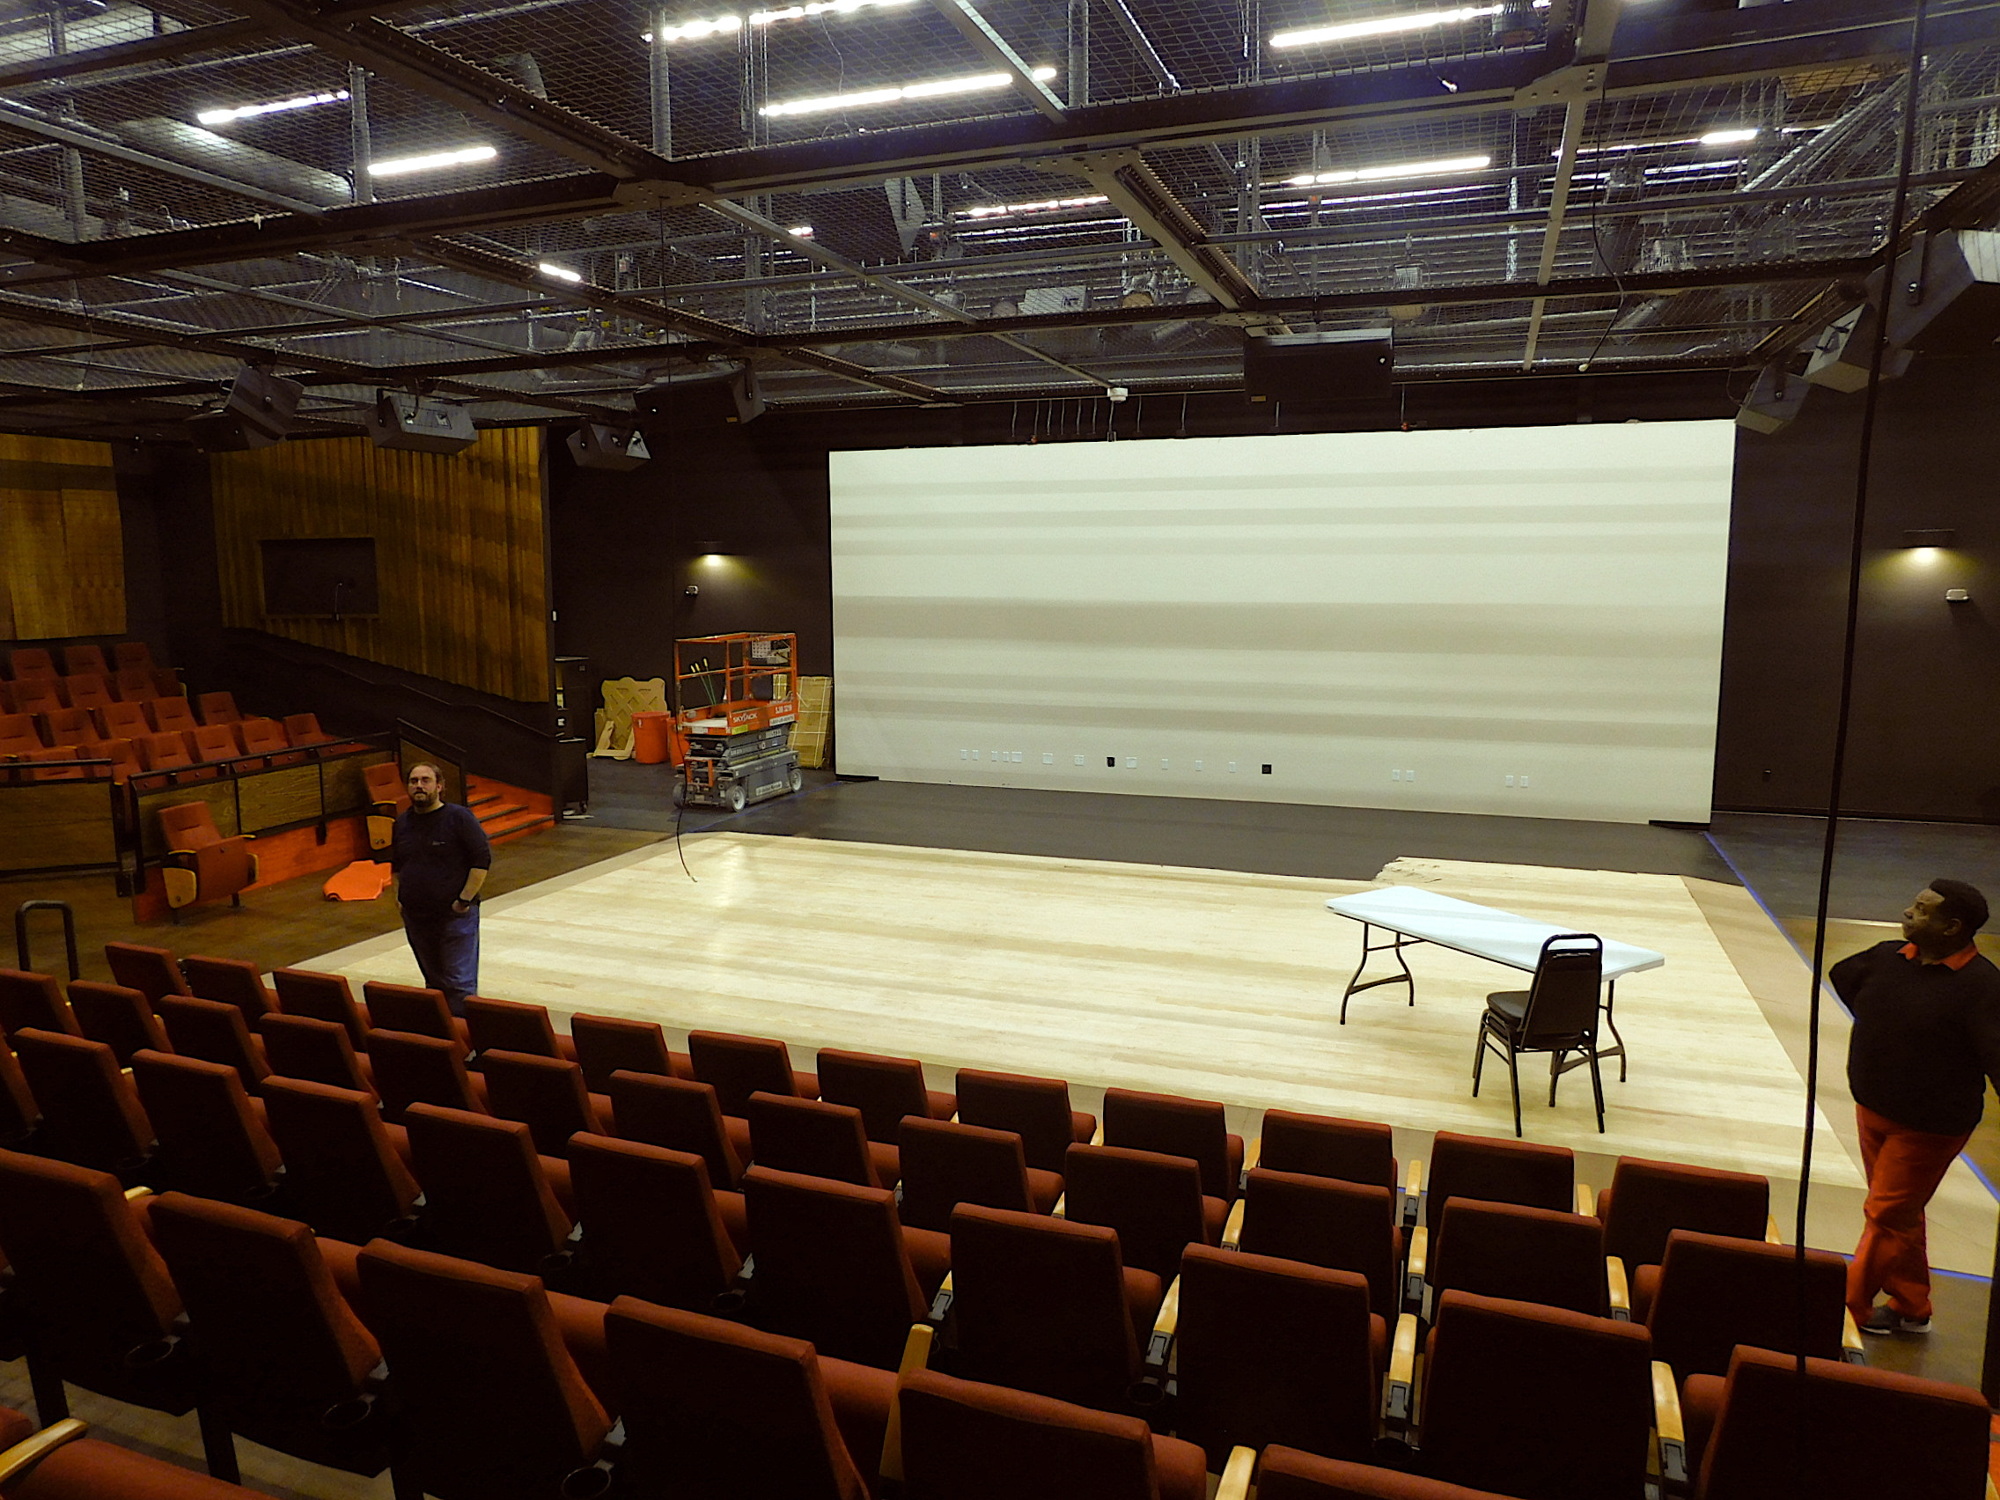 Final preparations are made on WBTT's new theater, the last part part of an $8 million refurbishing project.